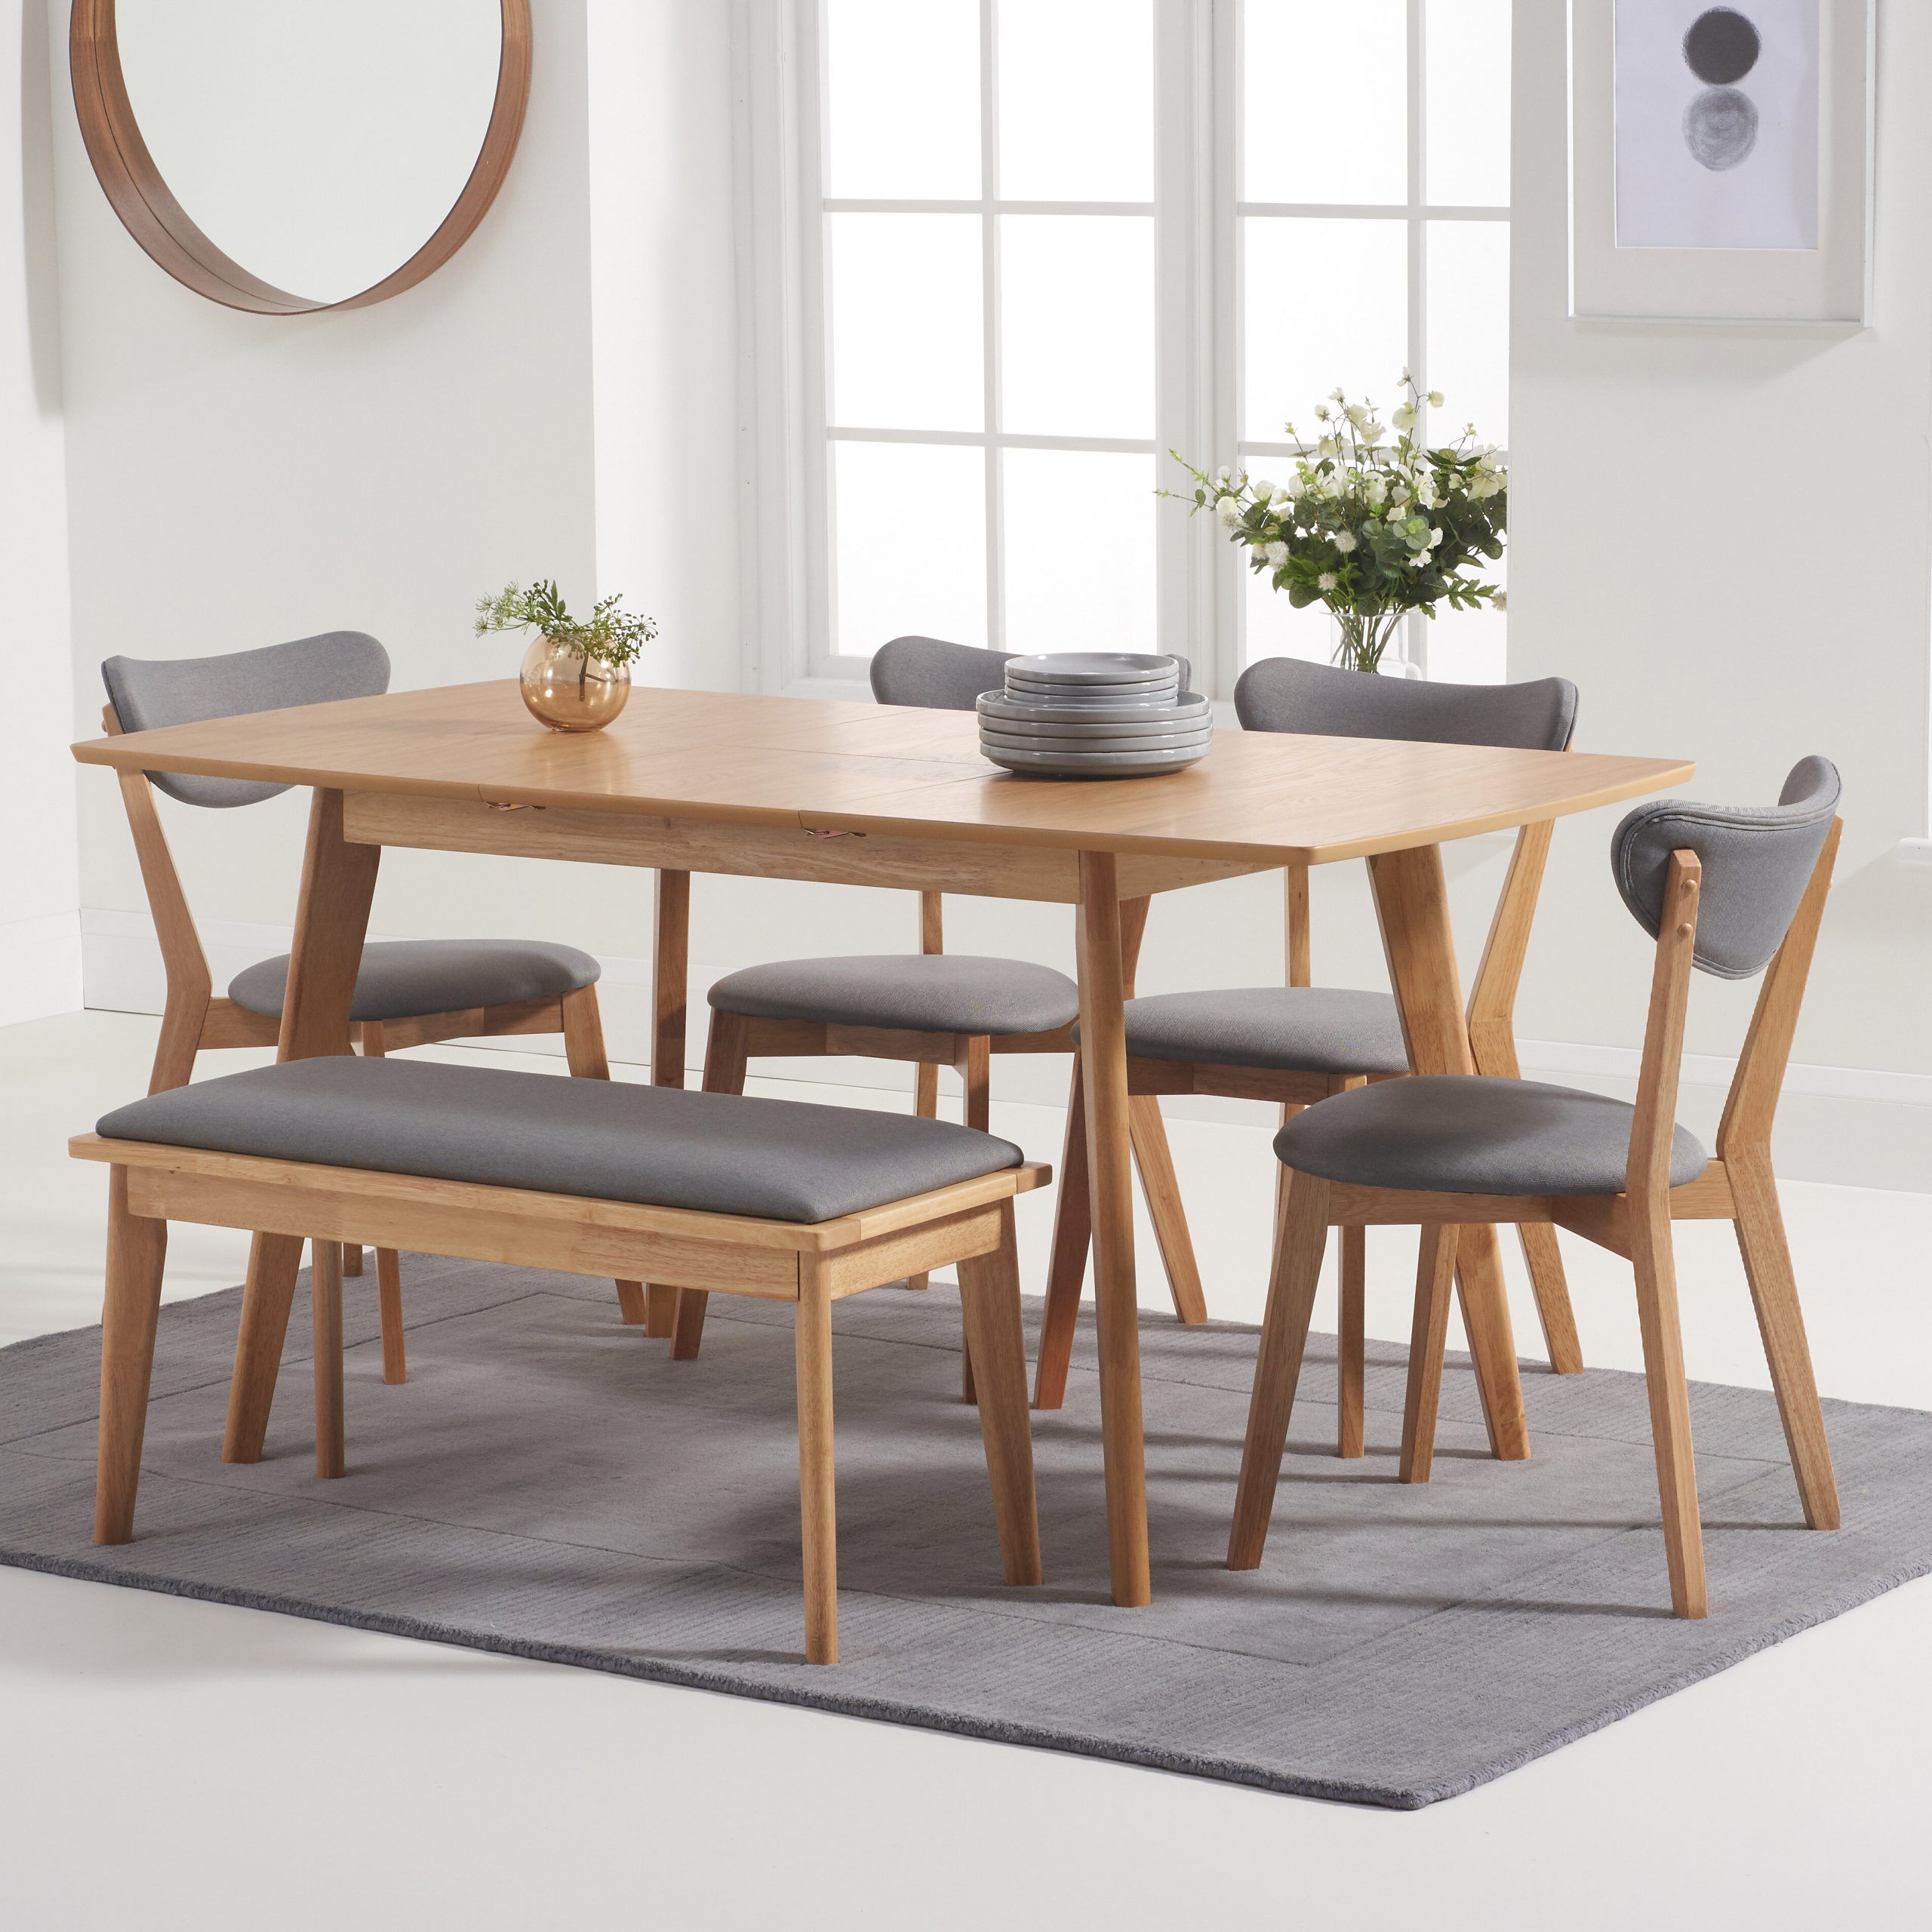 2020 Blackened Oak Benchwright Extending Dining Tables For Ideas About Extending Dining Bench, – Howellmagic Dining (View 18 of 25)